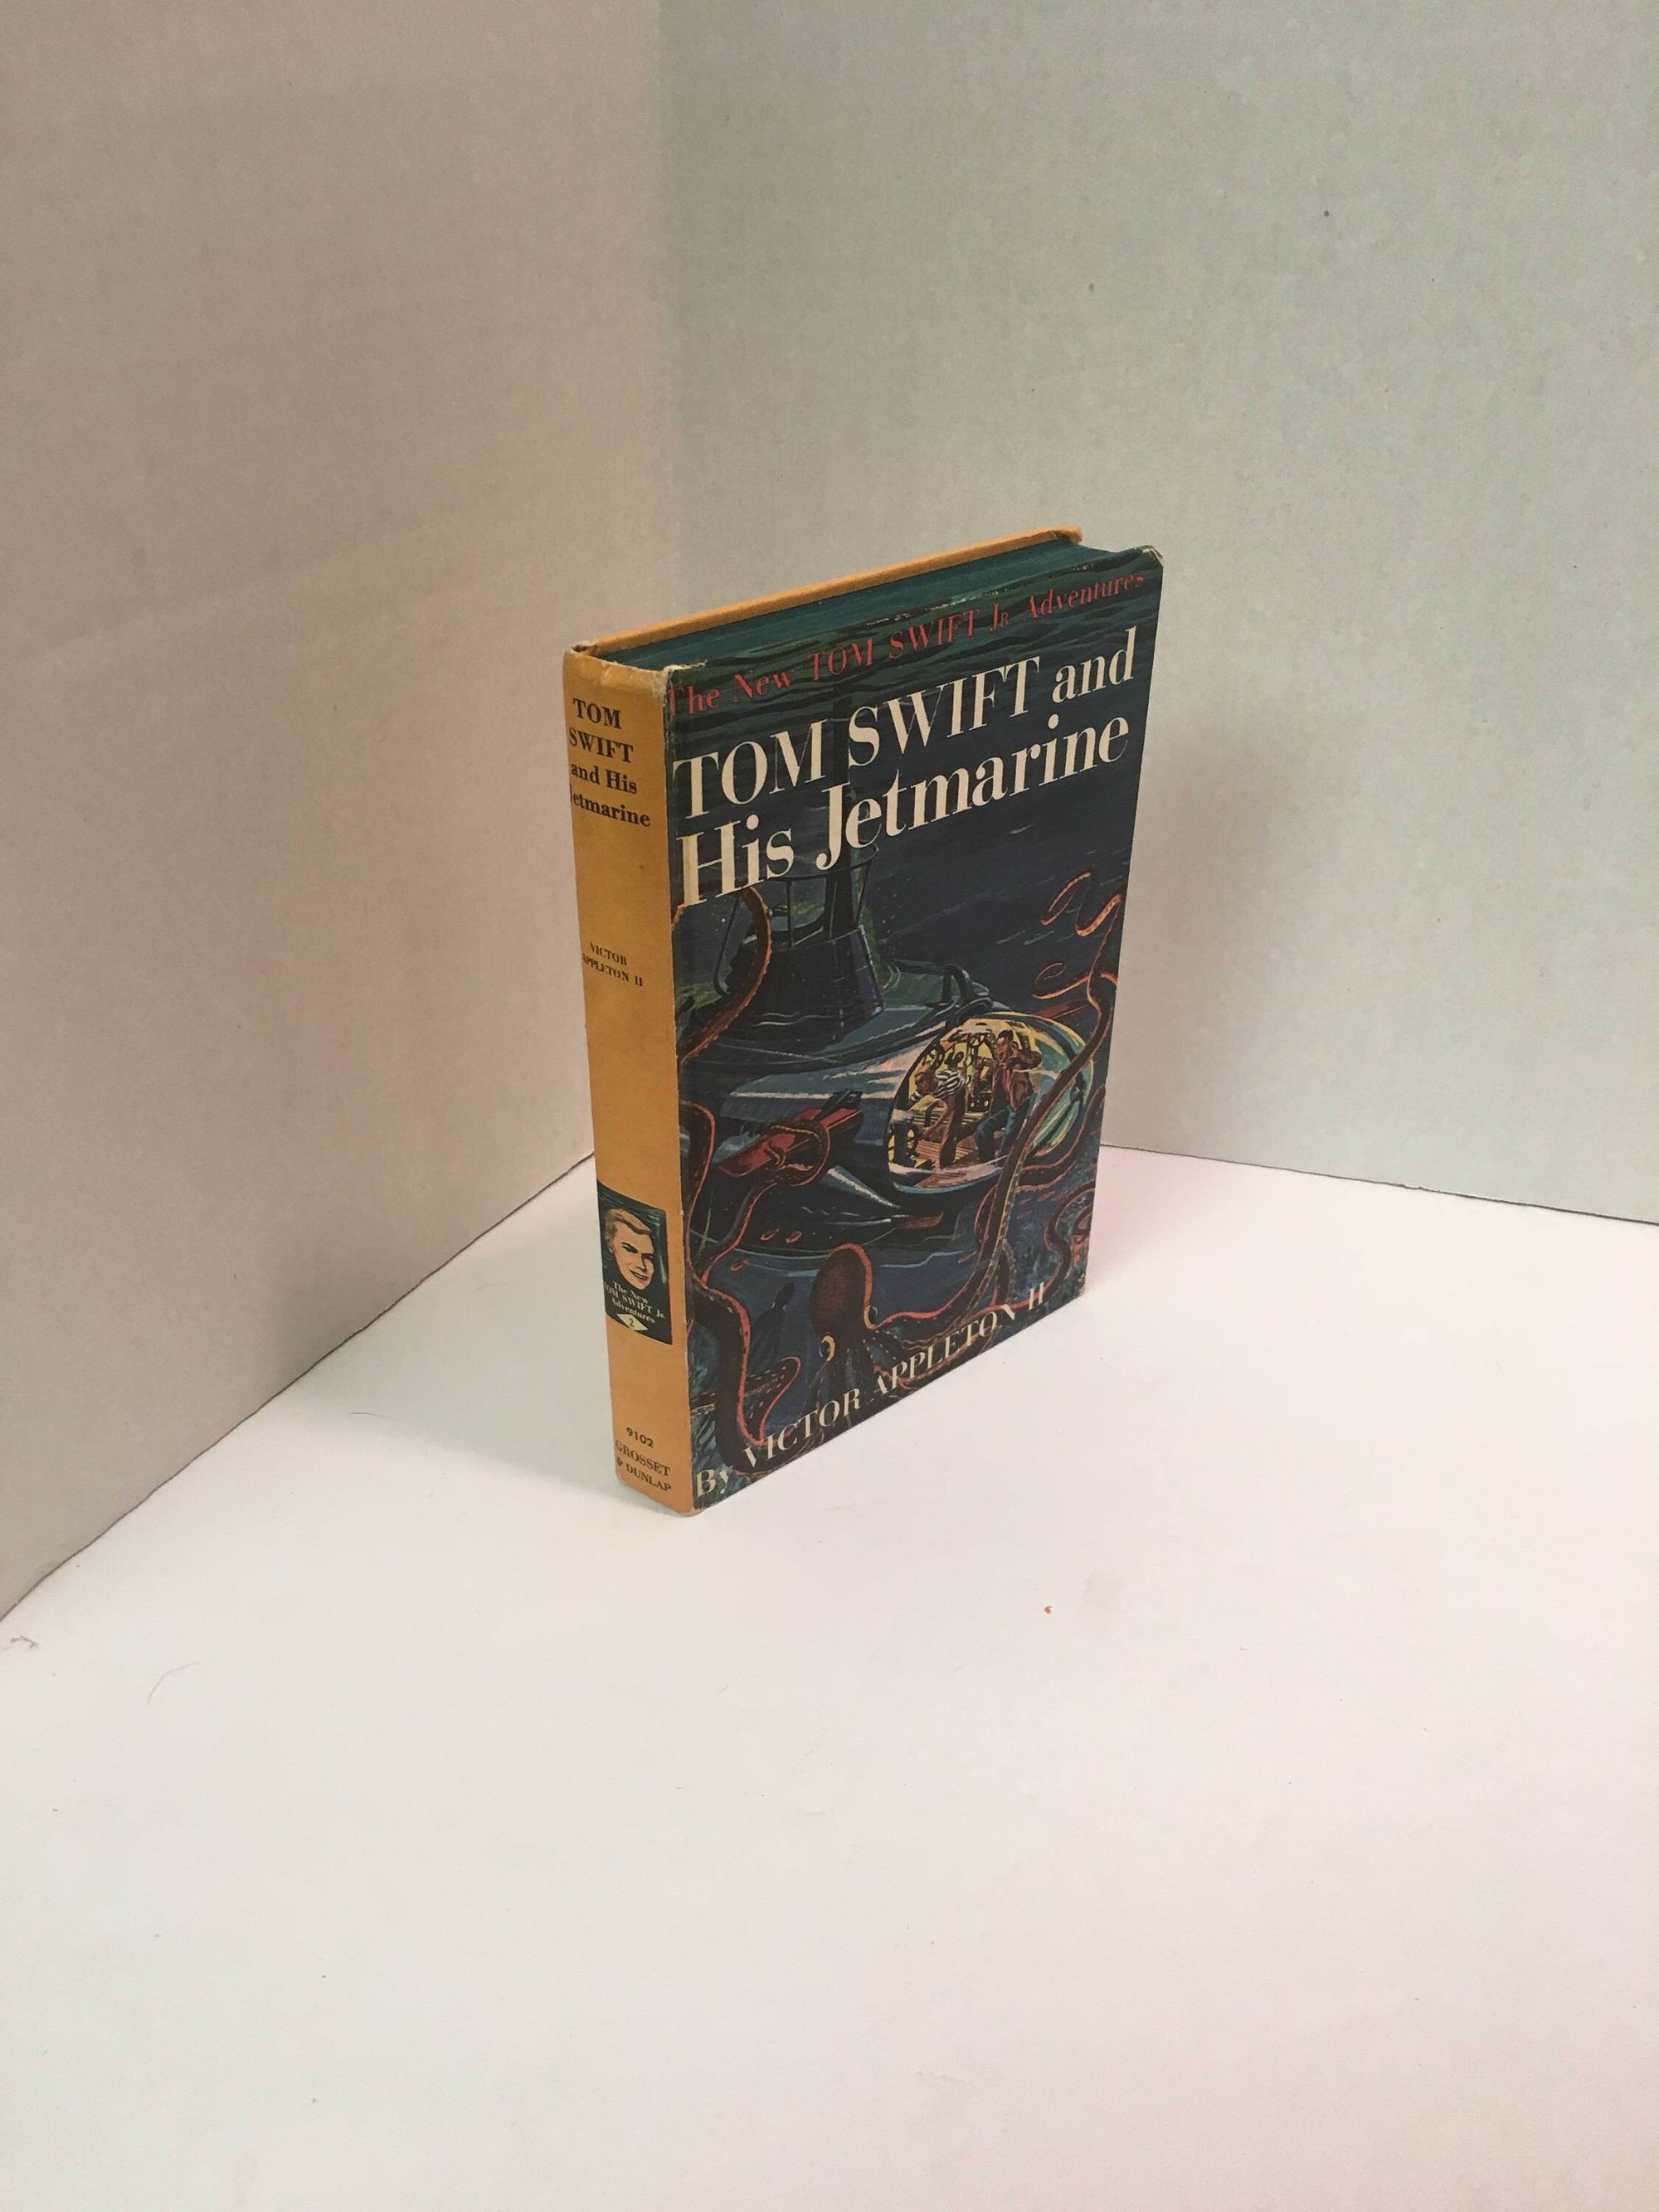 Tom Swift and His Jetmarine #2 by Victor Appleton 1954 A Vintage BookVintage Book